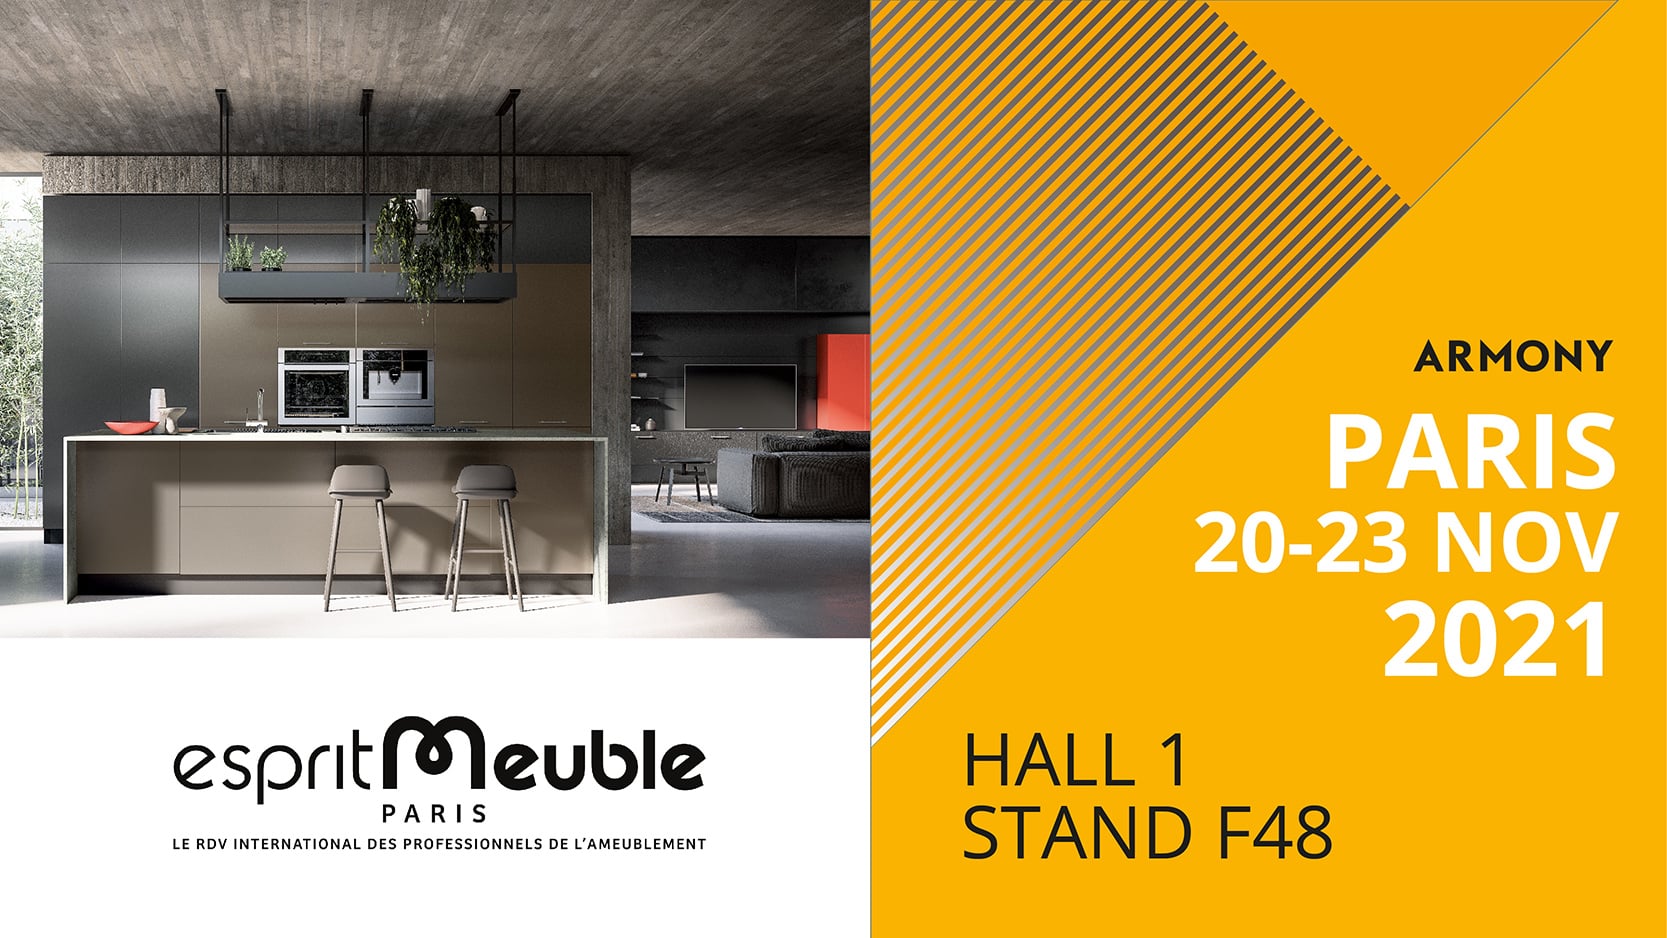 At a four day event, the over 43,000 m2 of Esprit Meuble bring together reunites interior designers and furniture professionals in Paris.